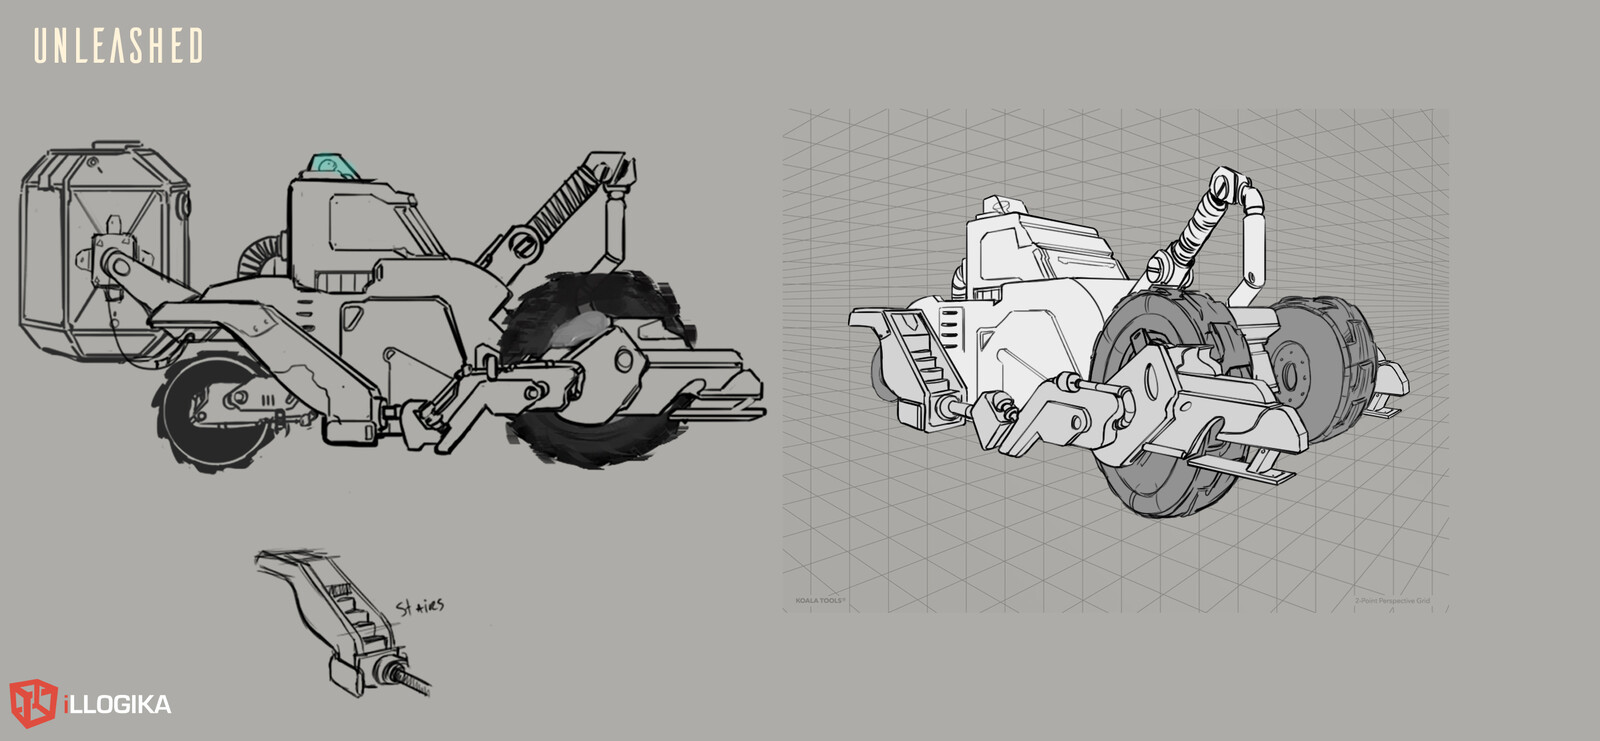 tractor concept 
I'm not the best at mechanical thing...